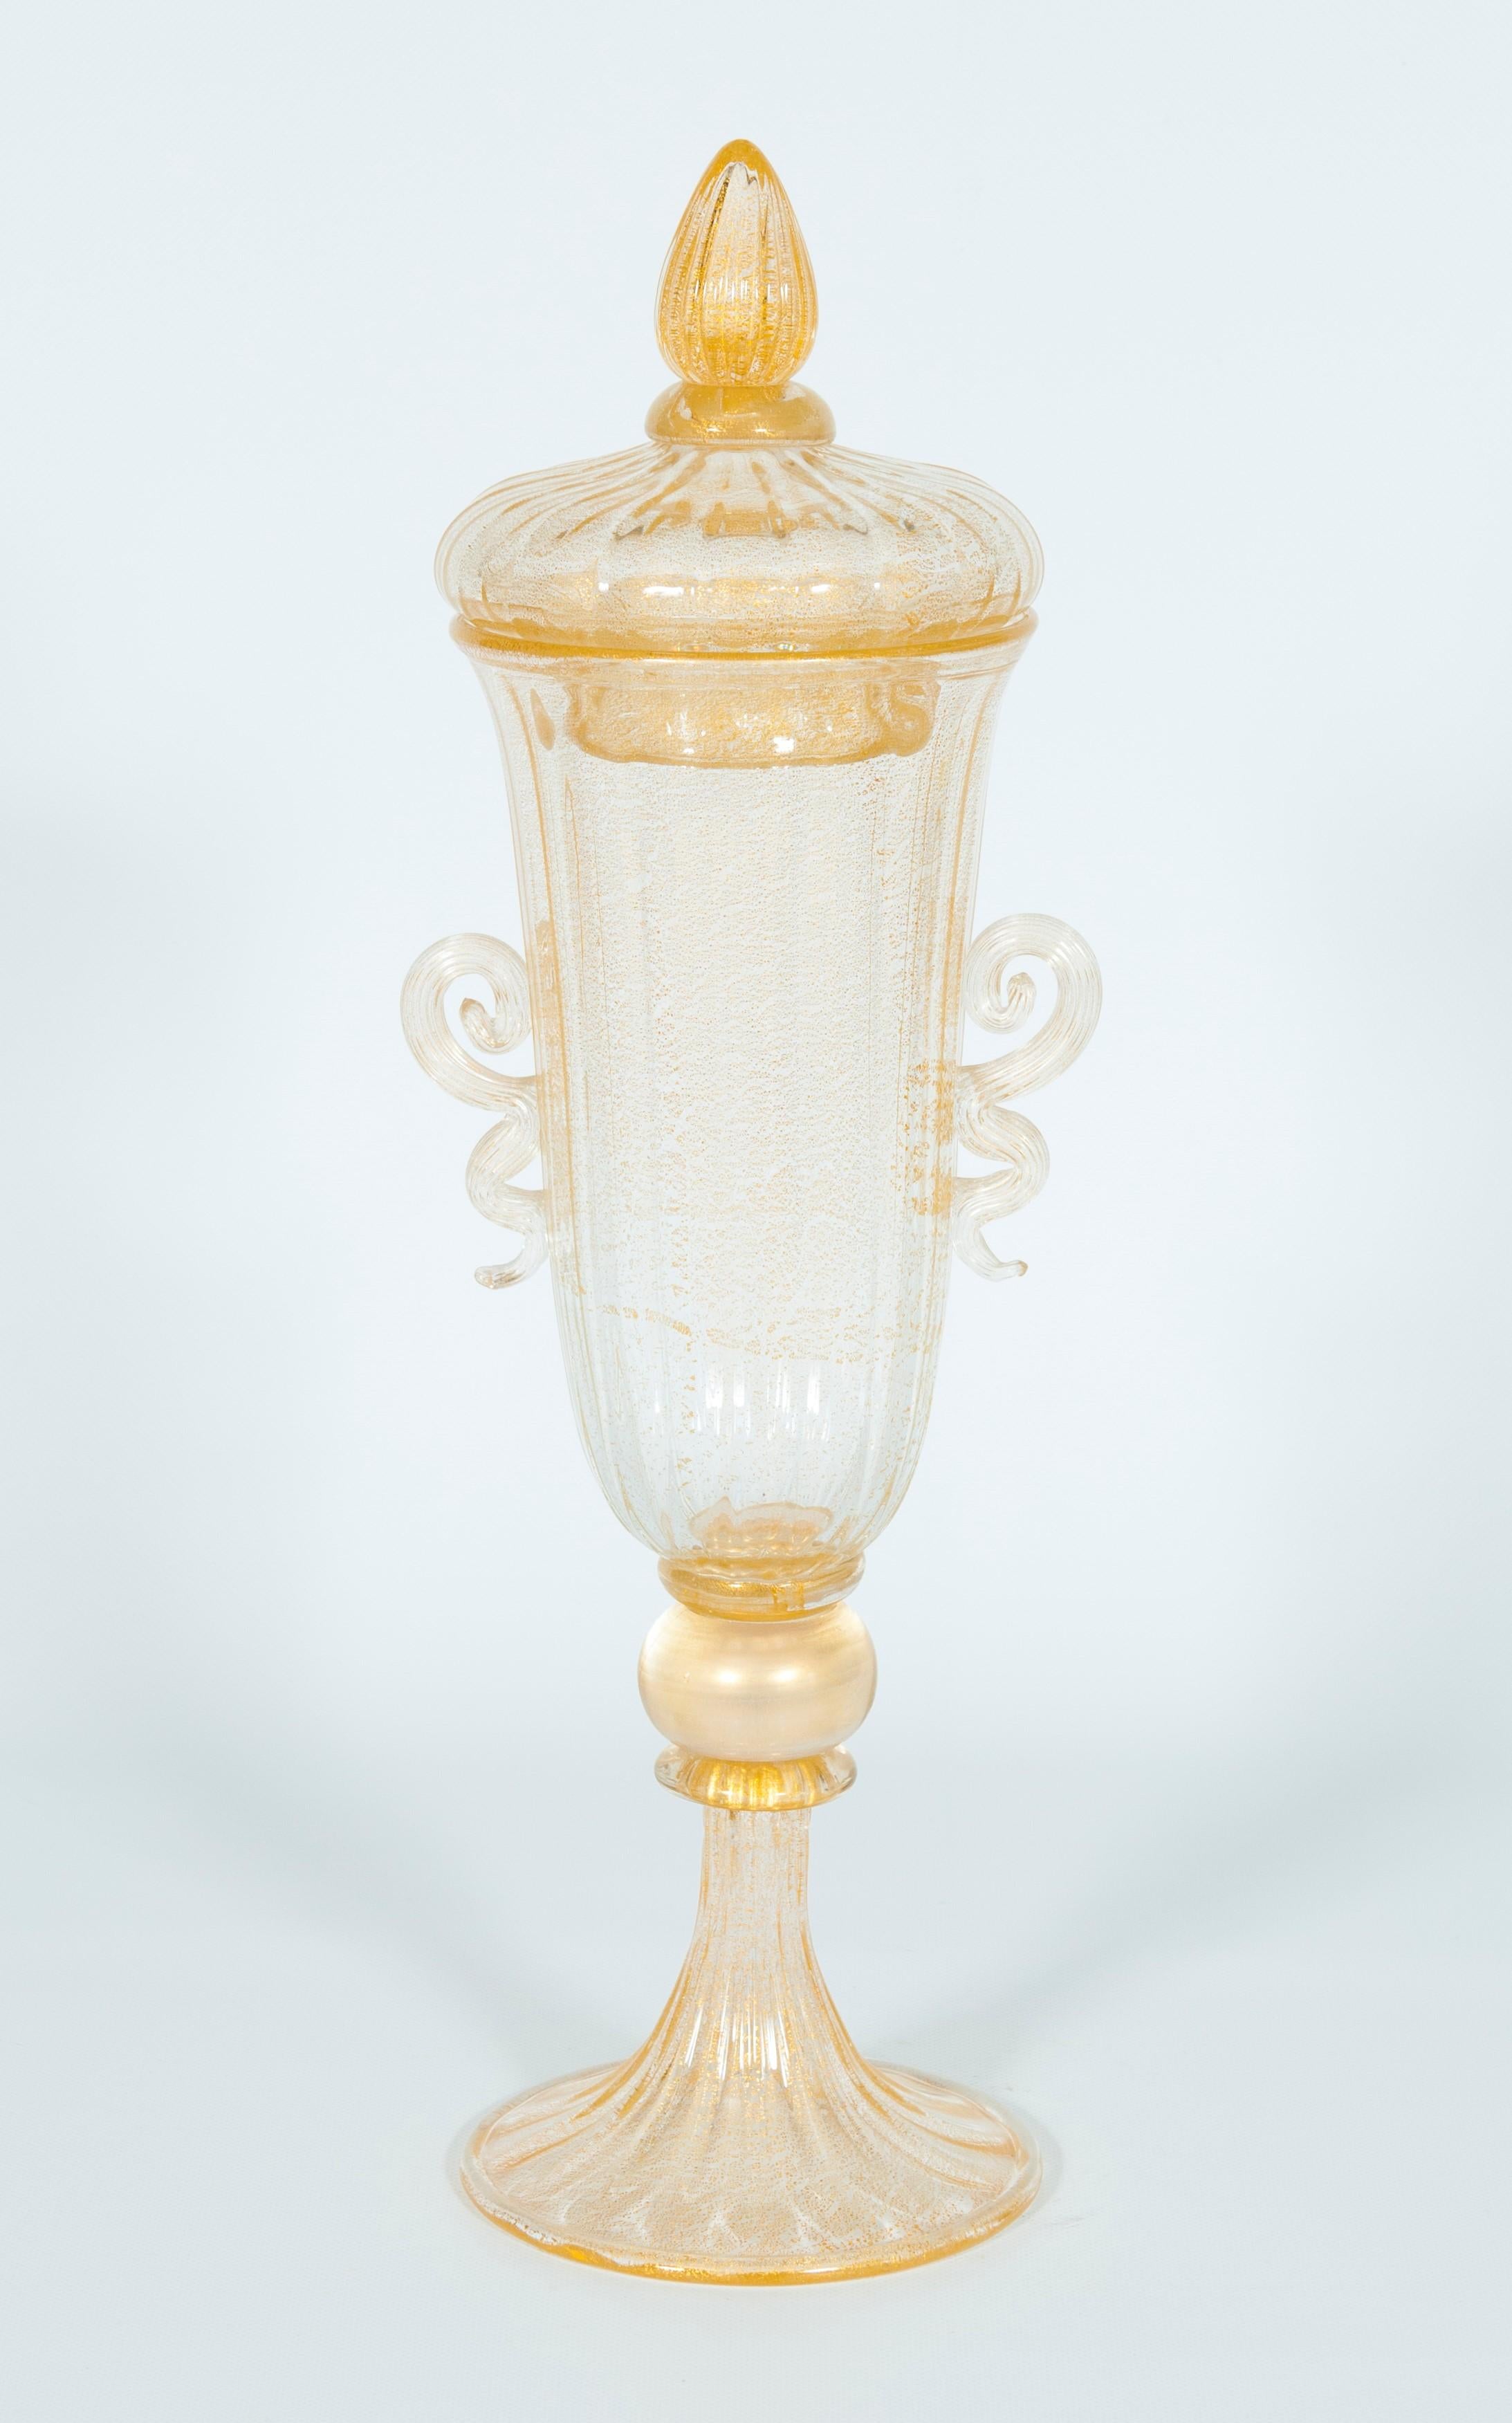 High-End Murano Glass Goblet with Lid and Gold Finishes Italy 1960s.
This mouth-blown transparent Murano glass goblet with gold finishes is pure beauty. Imagine placing this goblet at the center of the main table near a set of candleholders, and